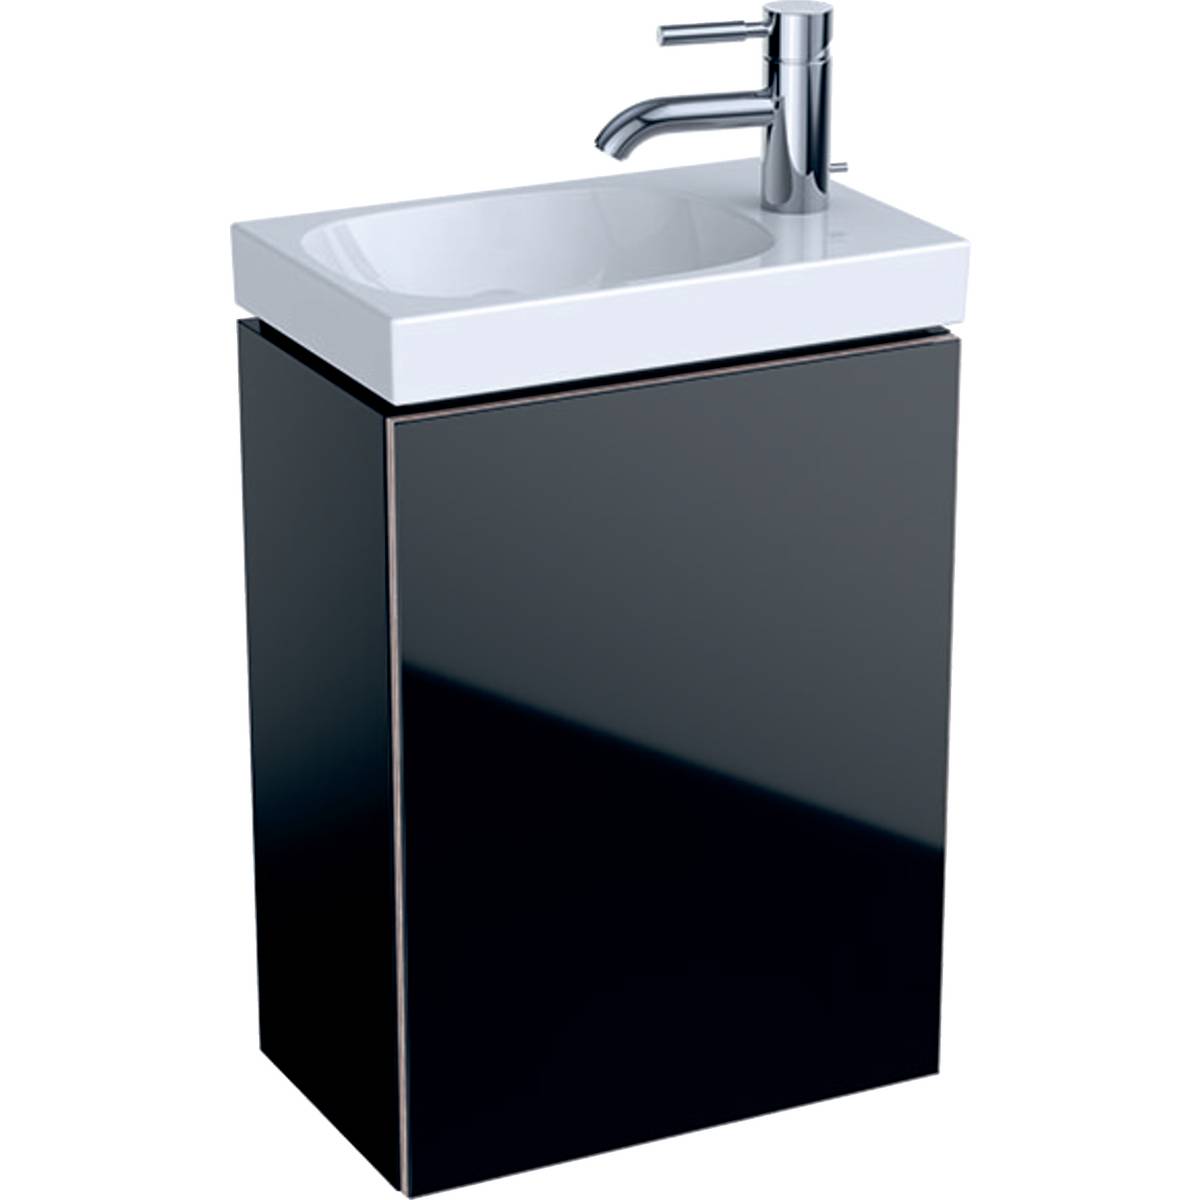 Acanto Cabinet for Handrinse Basin, with One Door and Trap